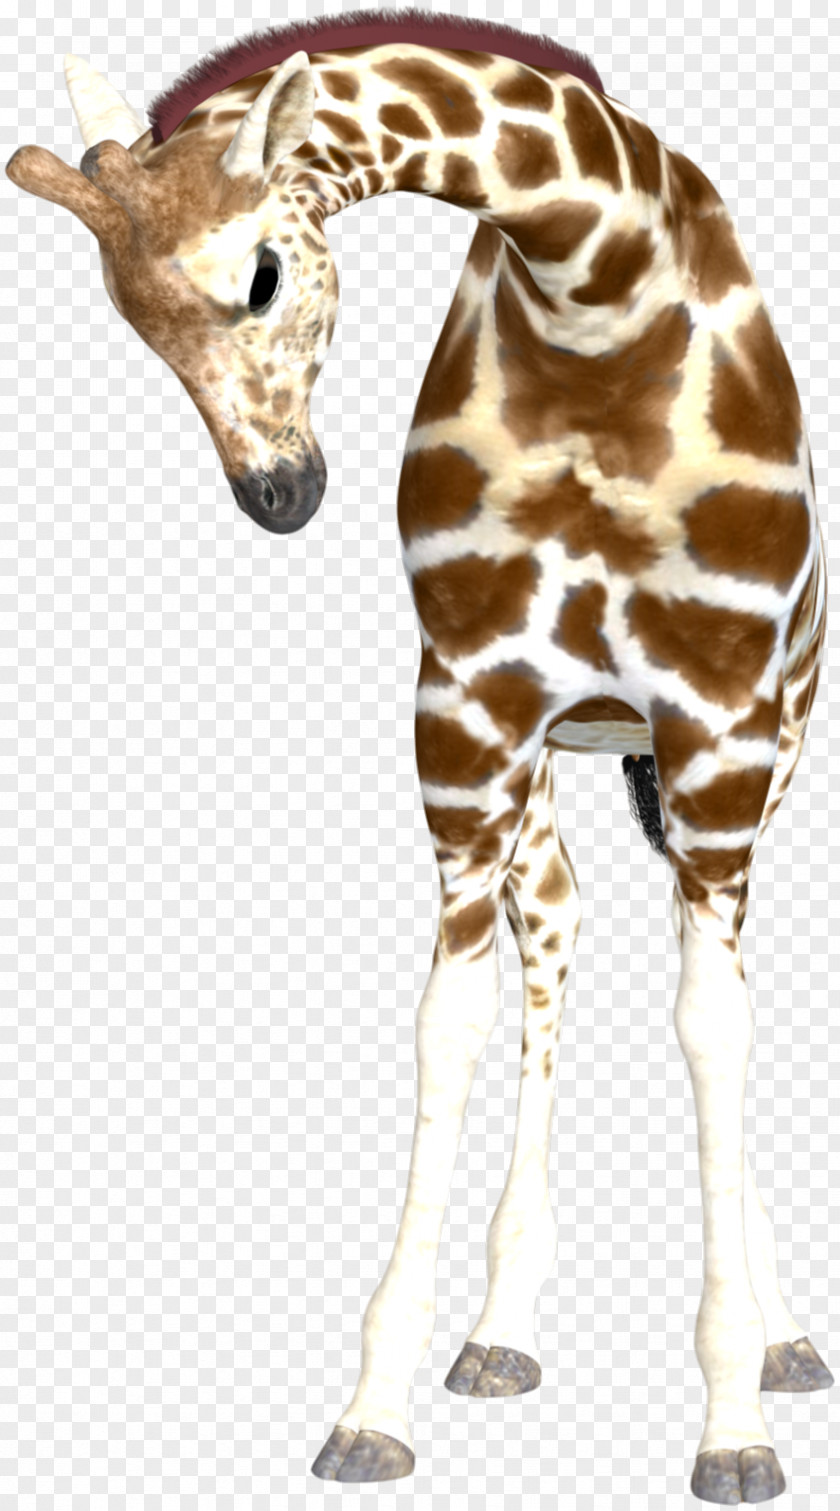 Giraffe Reticulated Download PNG